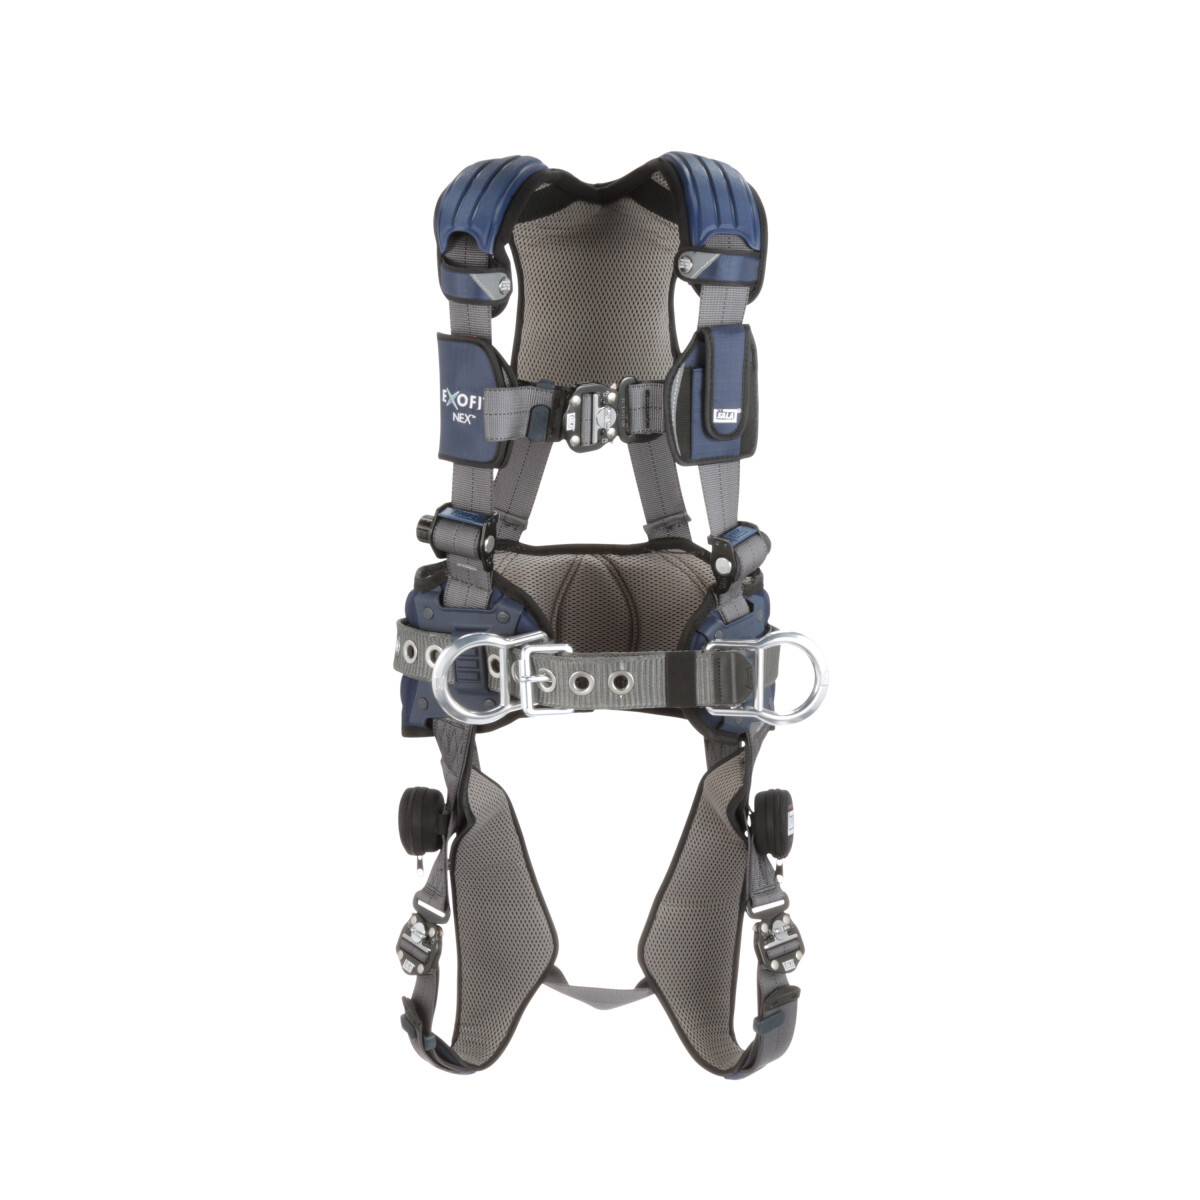 3M™ DBI-SALA® Small ExoFit NEX™ Construction/Full Body Style Harness With Tech-Lite™ Aluminum Back D-Ring, Duo-Lok™ Quick Connec